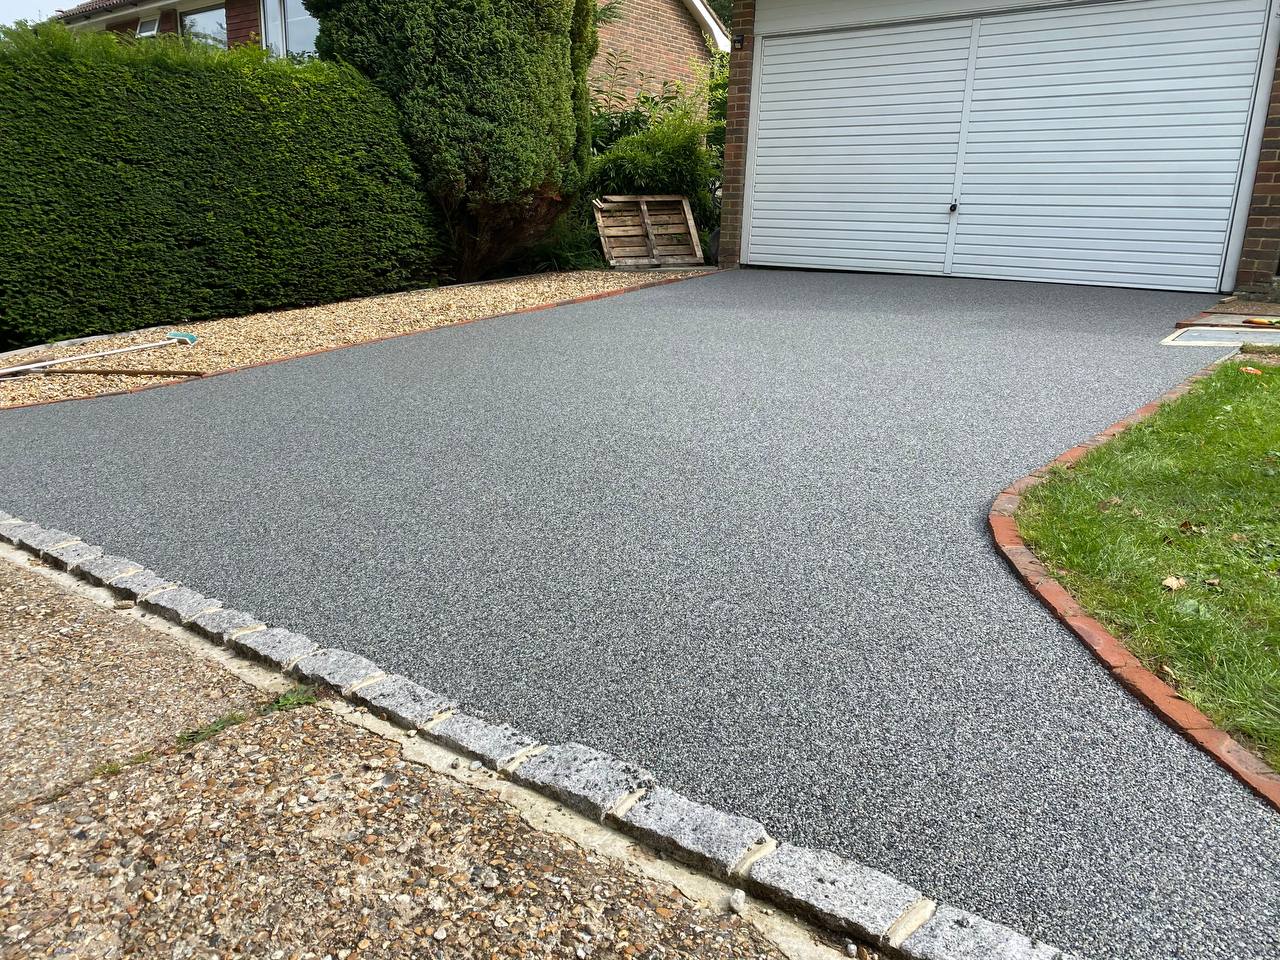 This is a photo of a new resin bound driveway carried out in Liverpool. All works done by Resin Driveways Liverpool